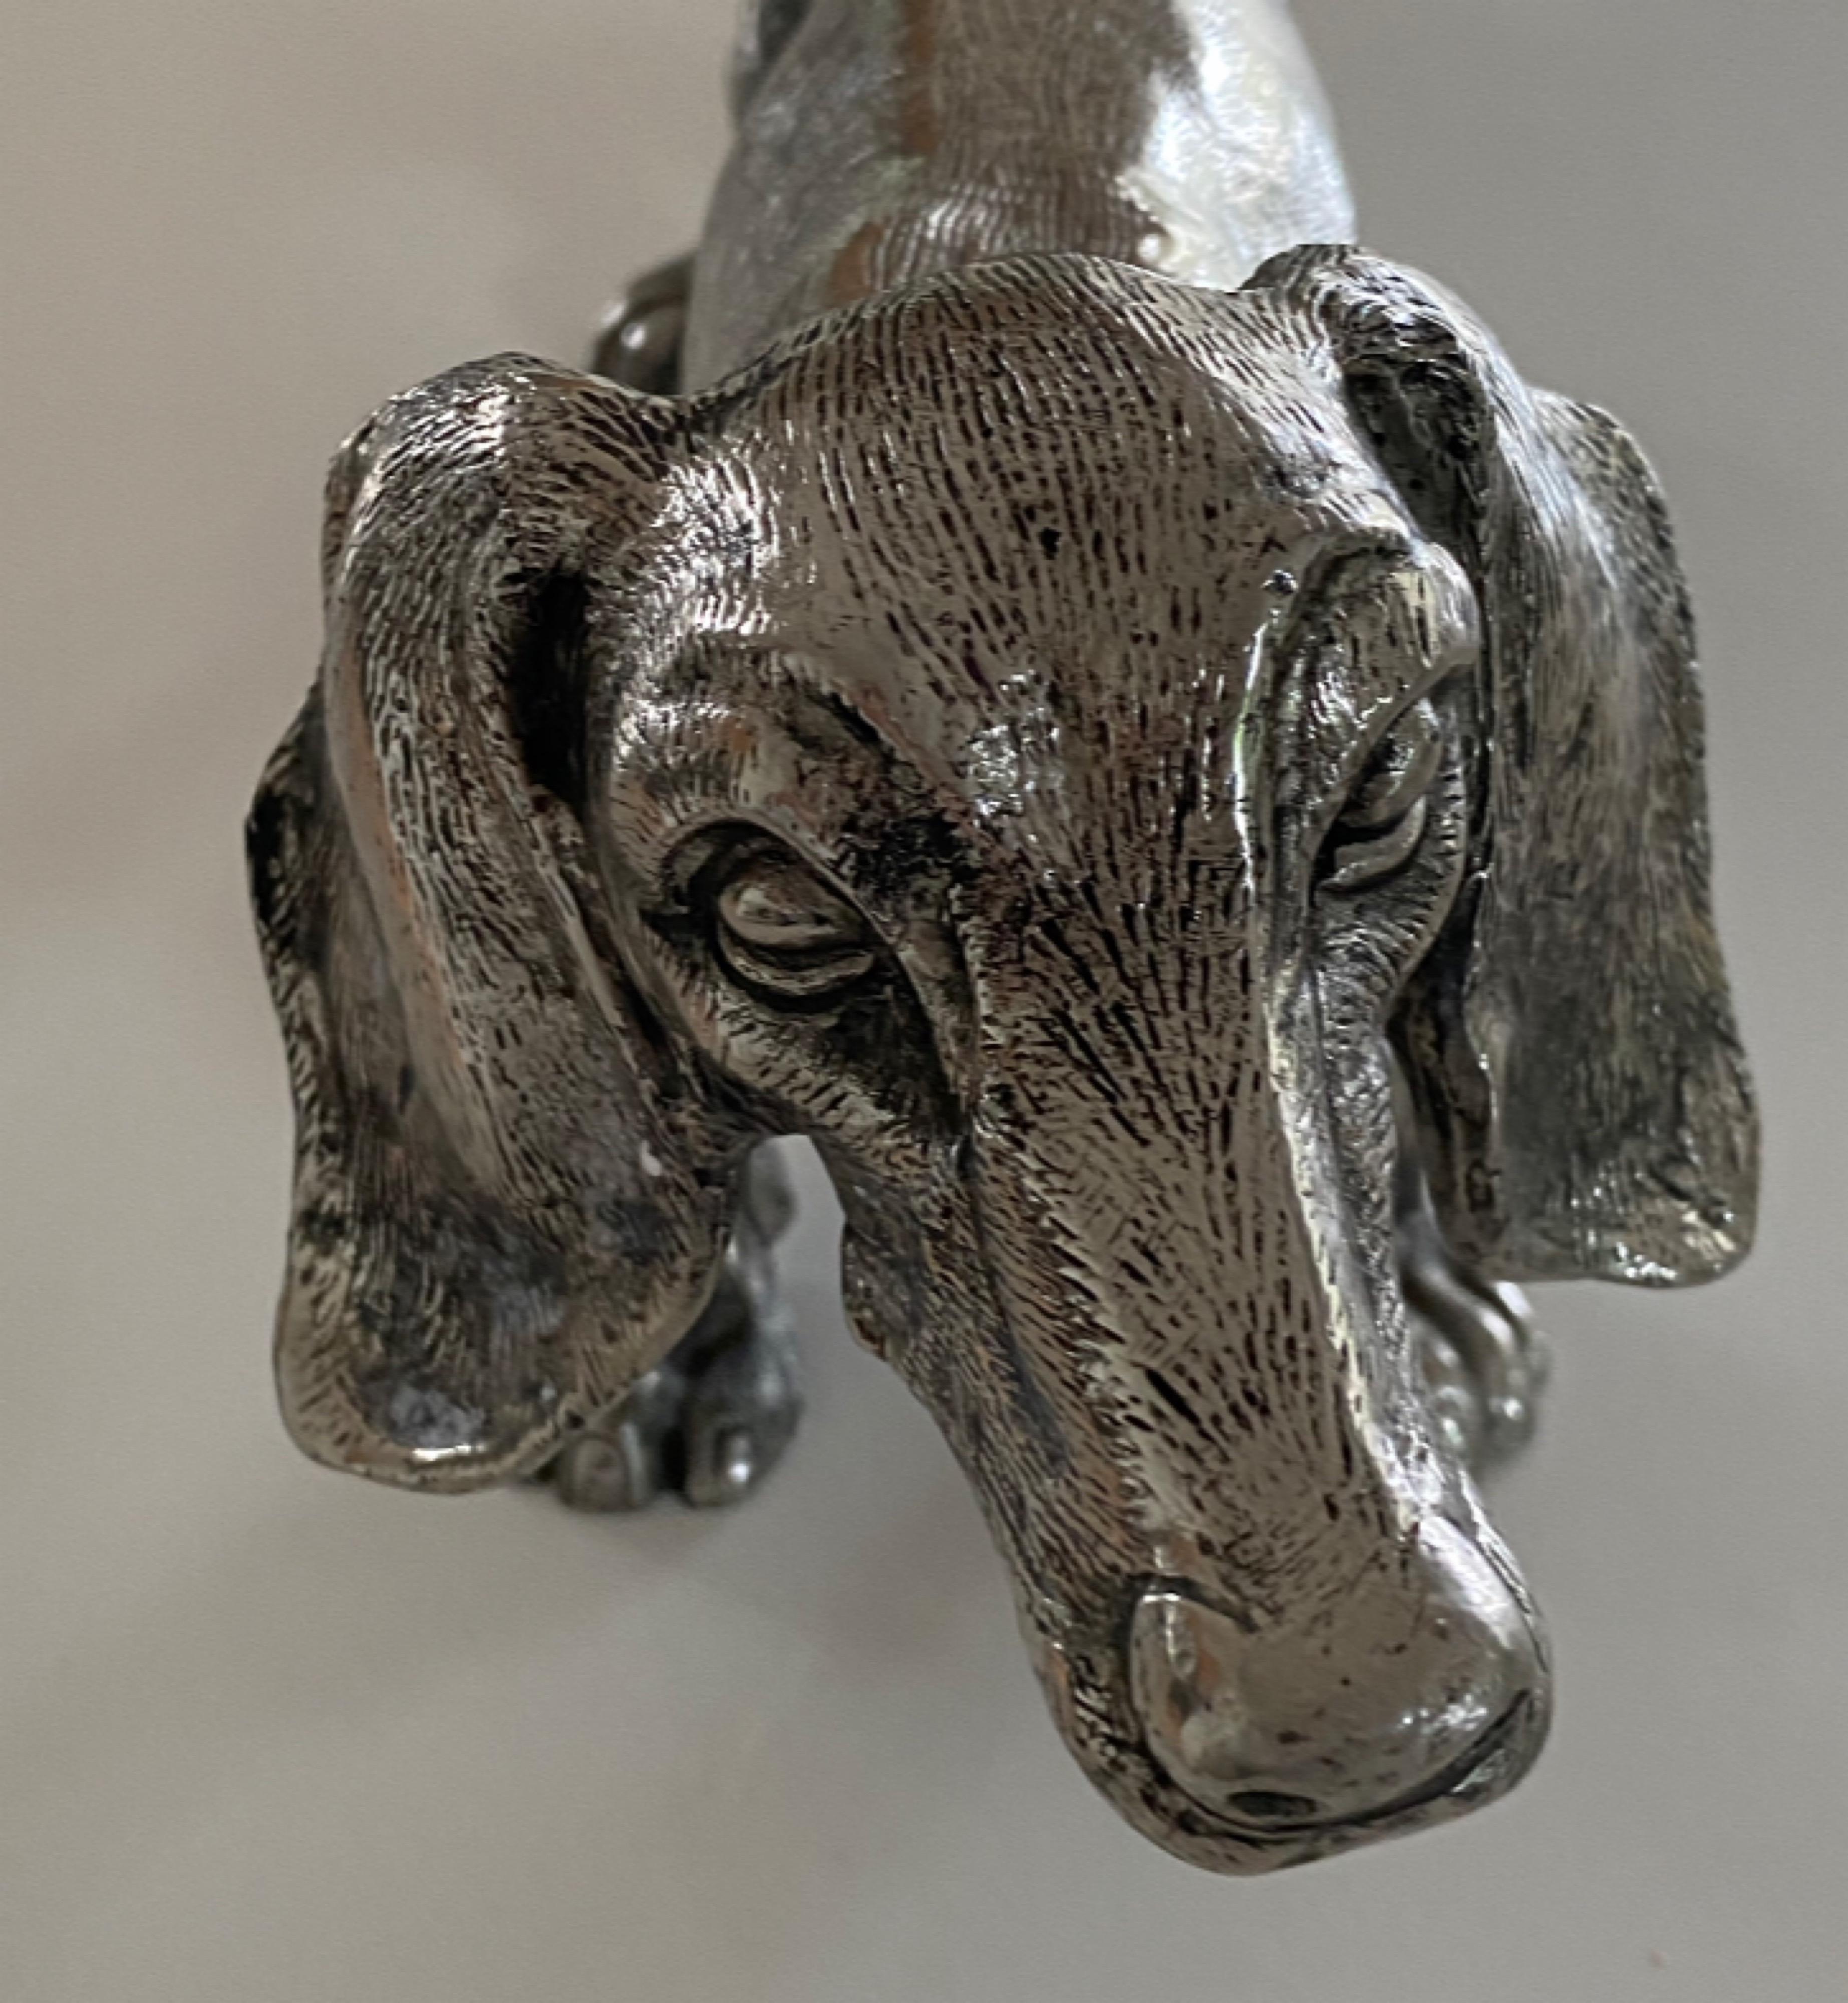 Silver-plated Gucci Dachshund  Dog Sculpture from the 1970s. Handcrafted in Italy. Great vintage Gucci collectible. Stamped Gucci and made in Italy on the bottom. This chic pup would be a nice addition to a bookcase or as coffee table decor. Want to